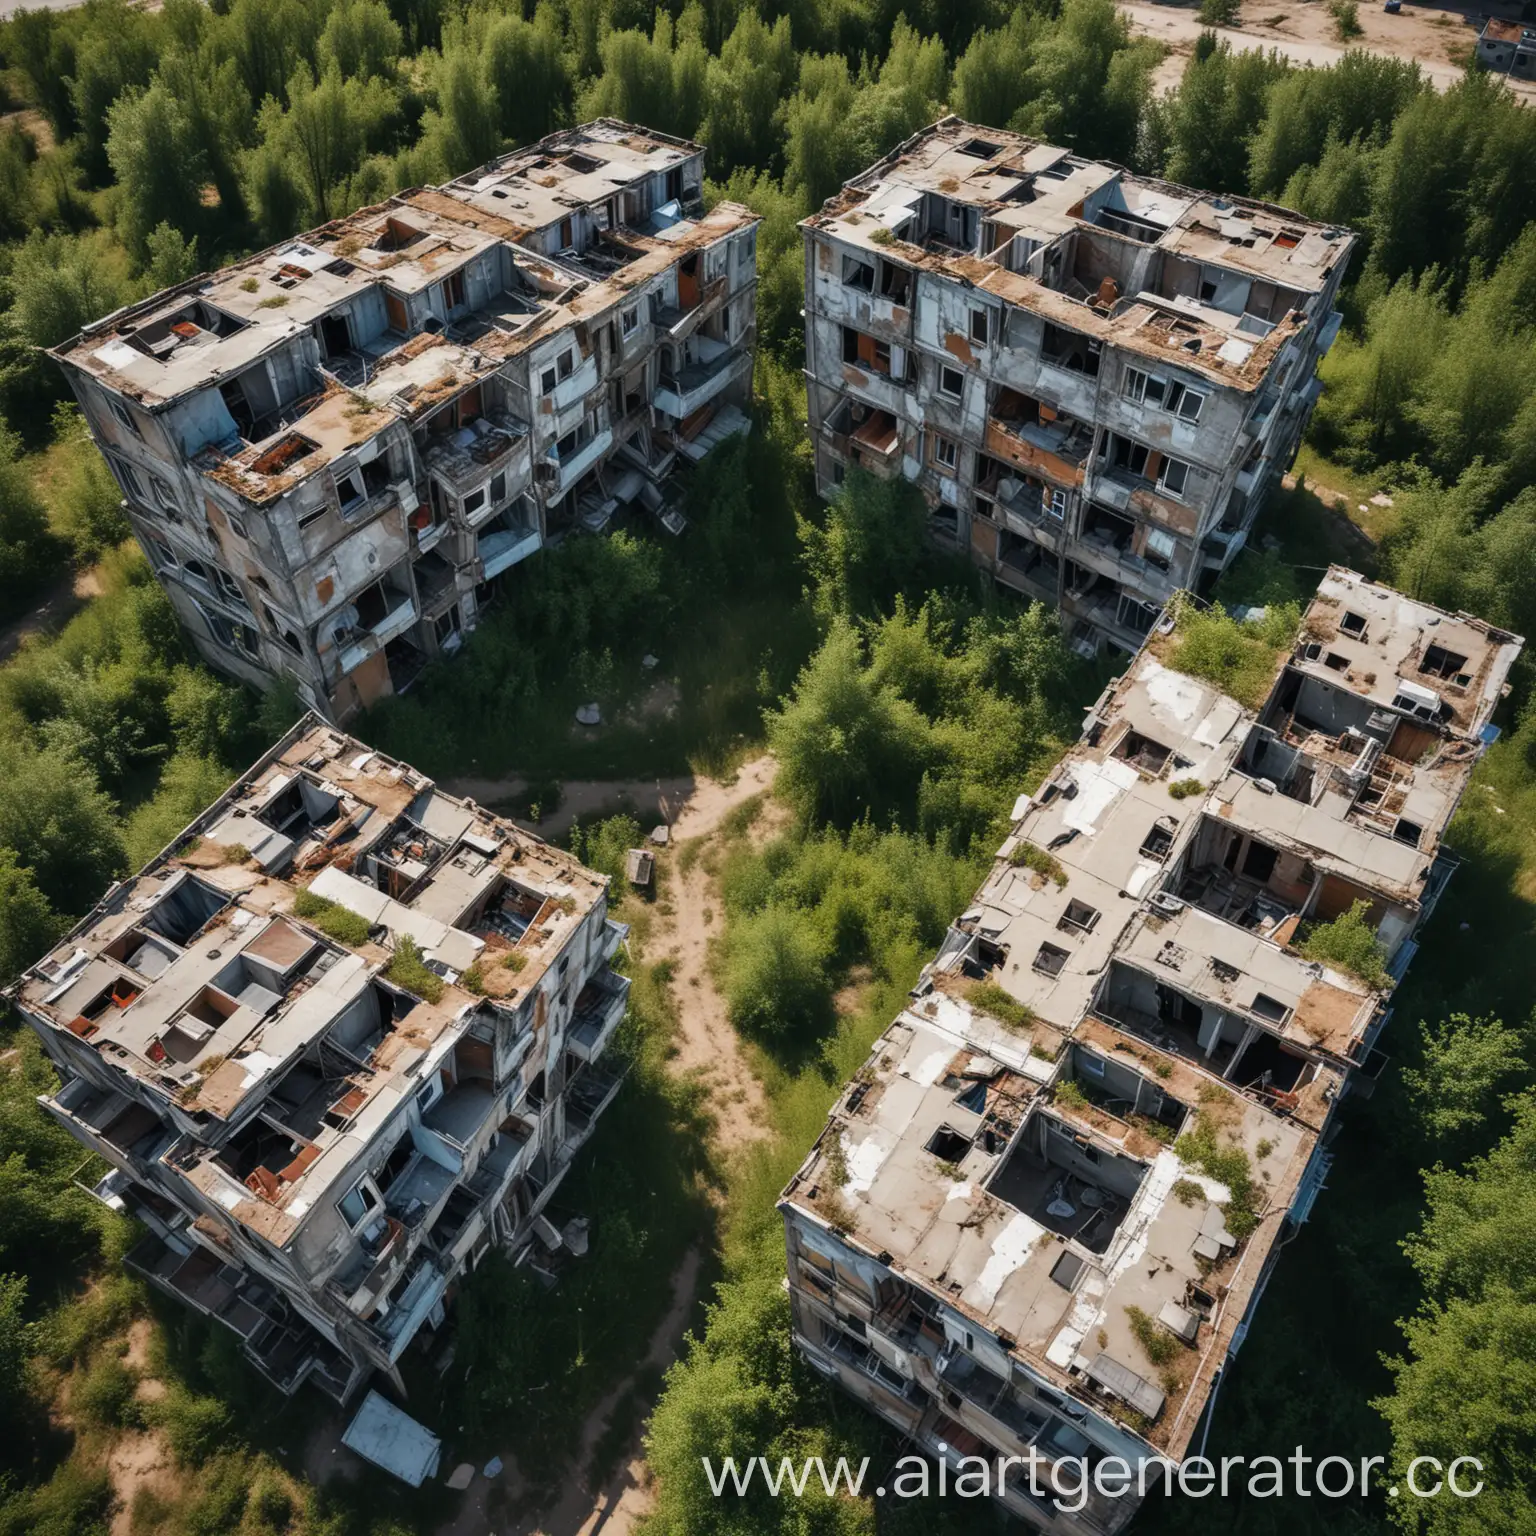 Abandoned-Childrens-Camp-Drone-View-of-Summer-Abandoned-Houses